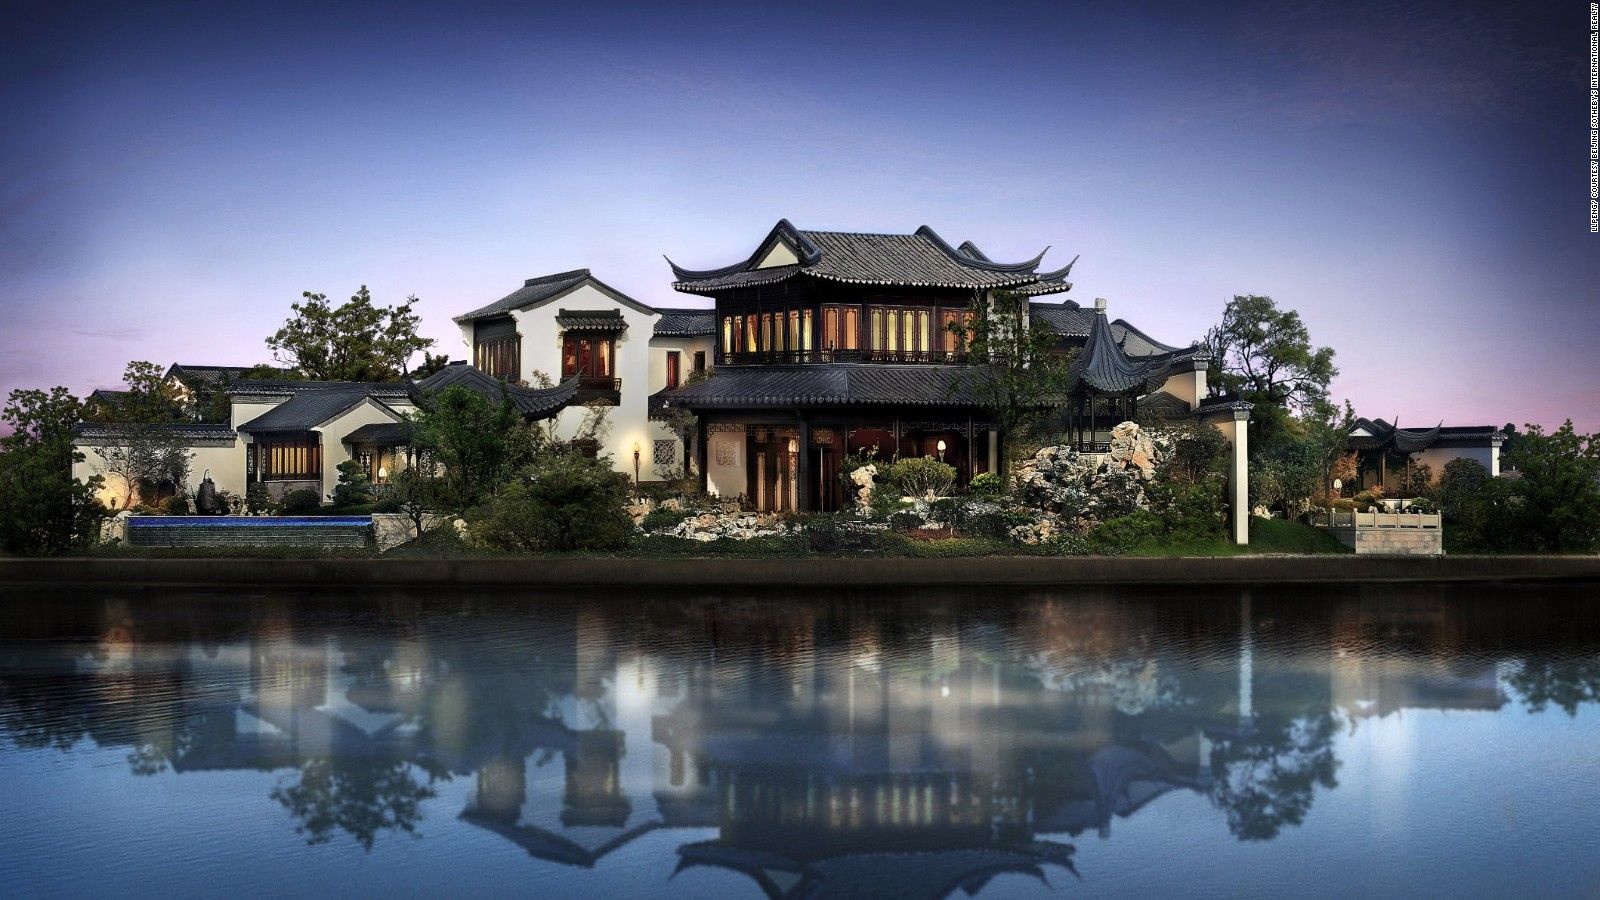 Why China's Super Wealthy Shun Western Looking Homes